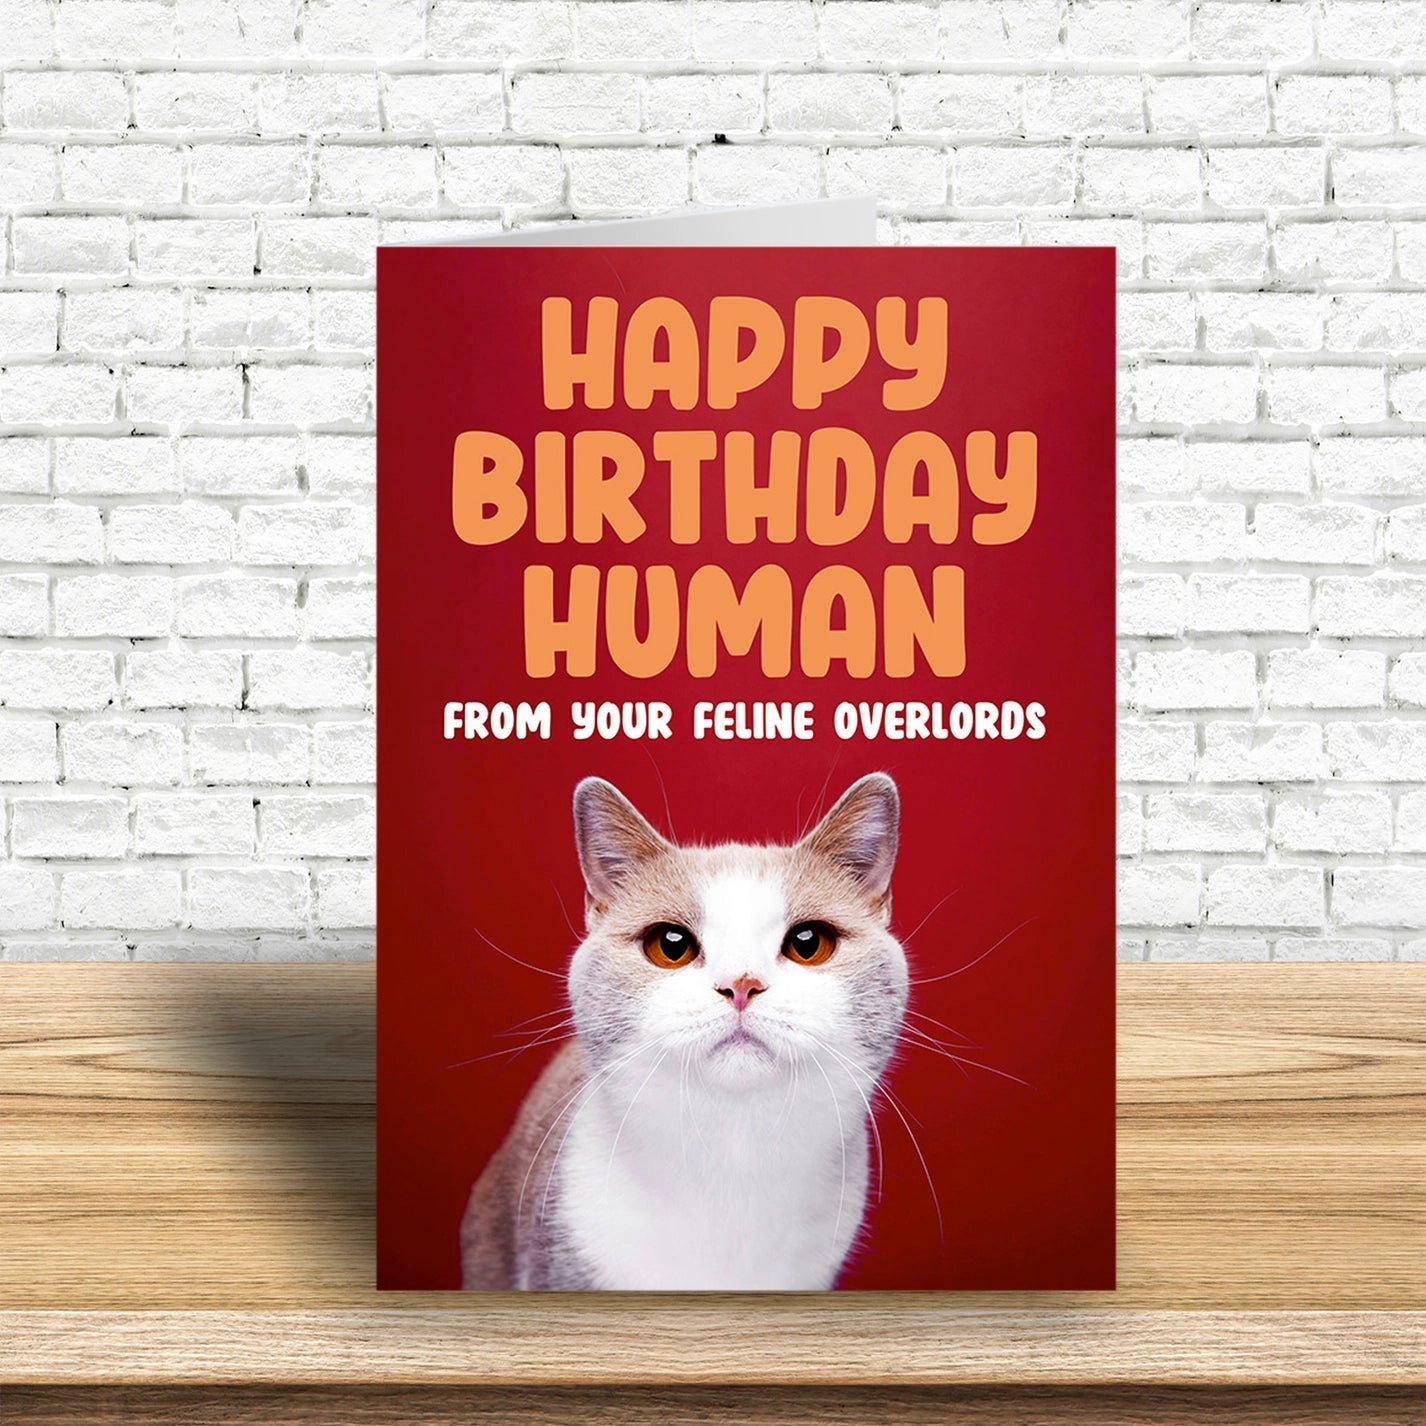 Happy Birthday Human From Your Feline Overlords Greeting Card